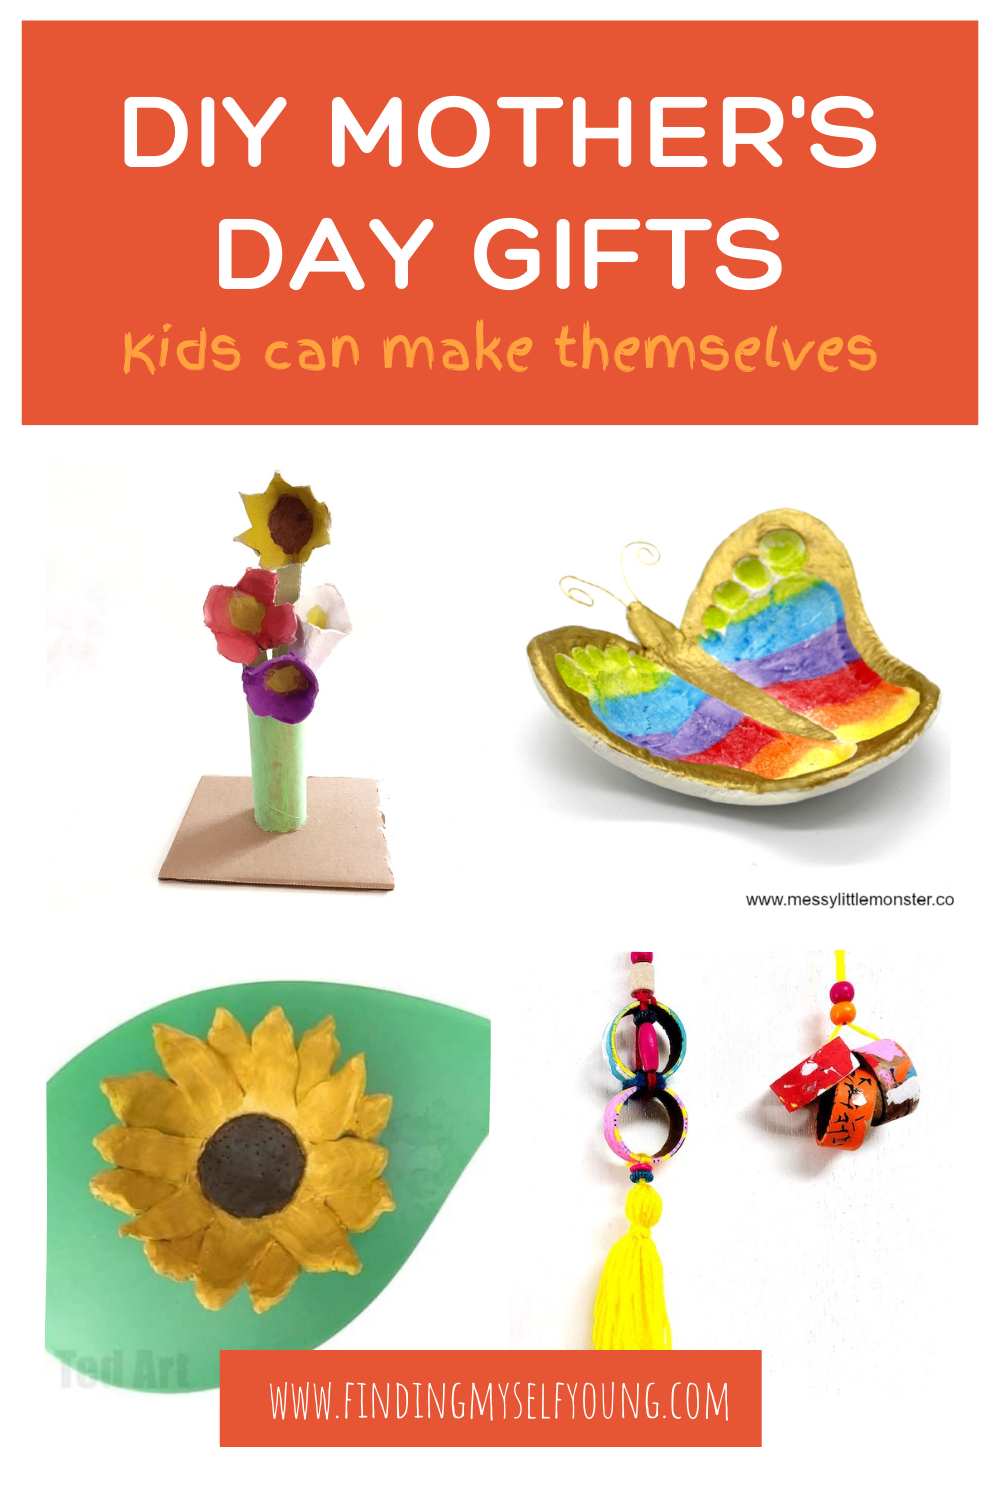 13 creative DIY Mother's Day gifts kids can make + give